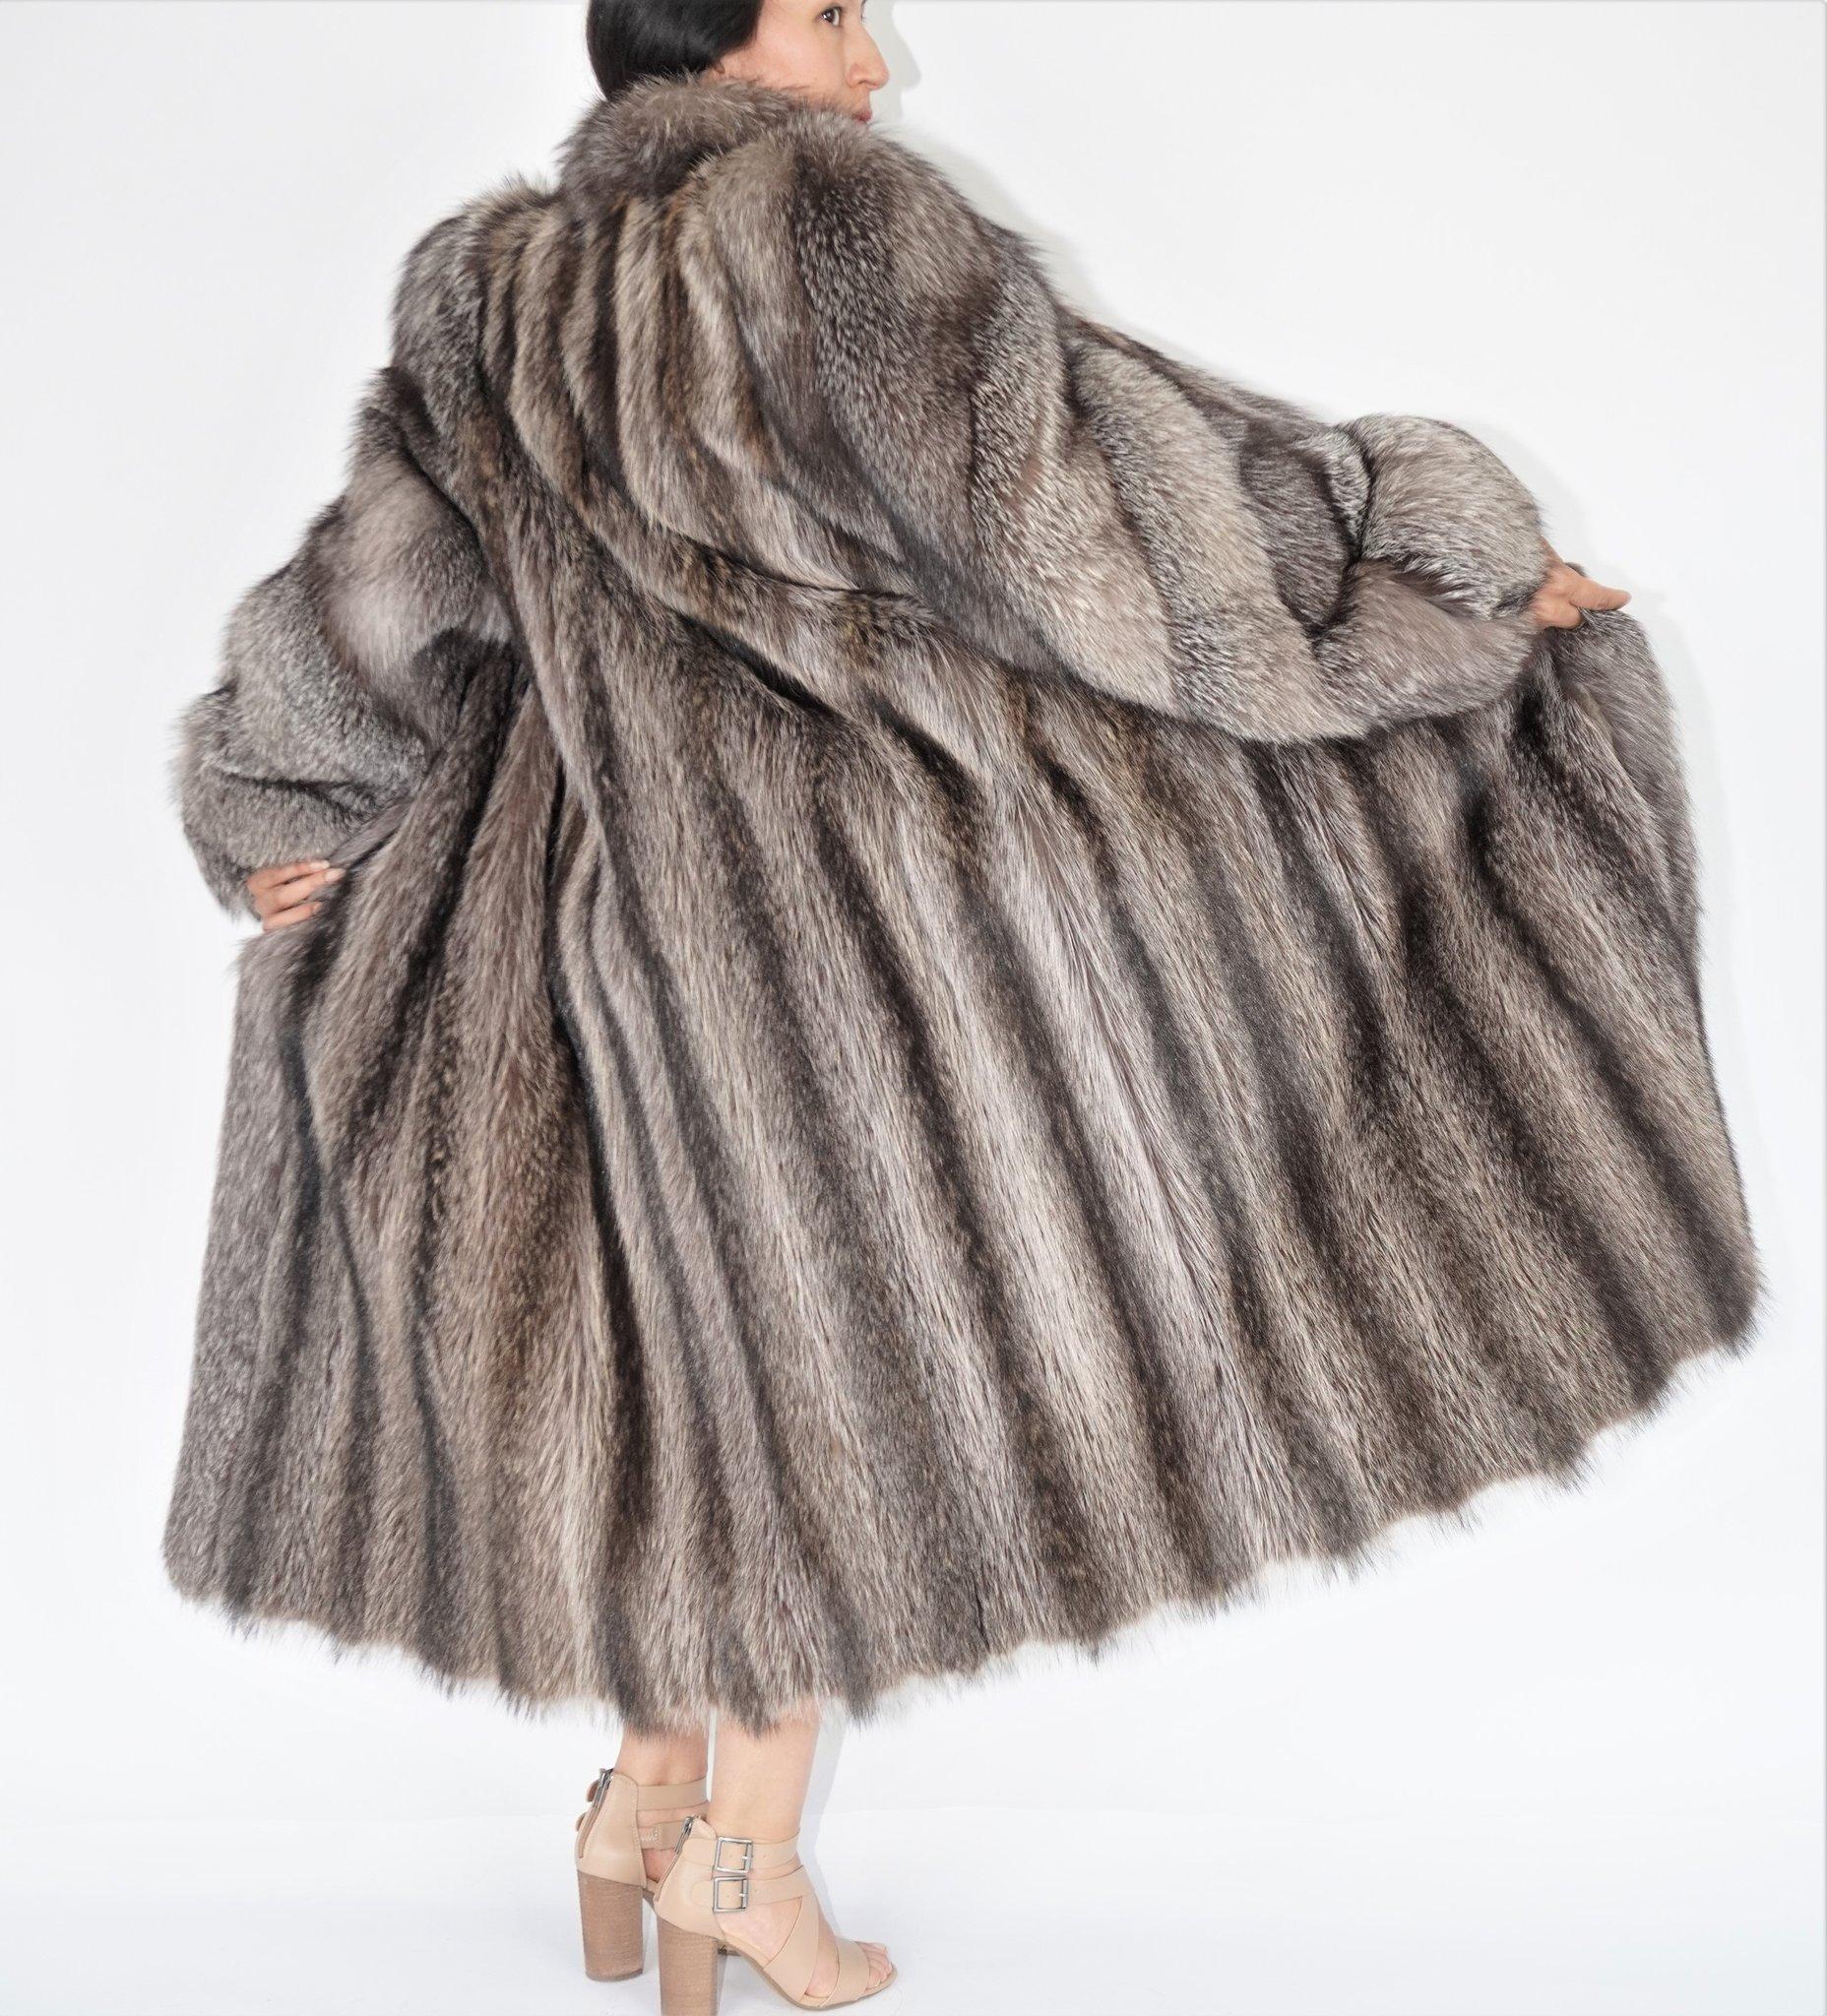 Women's Raccoon fur coat with silver fox trim and sleeves size 8-10 For Sale